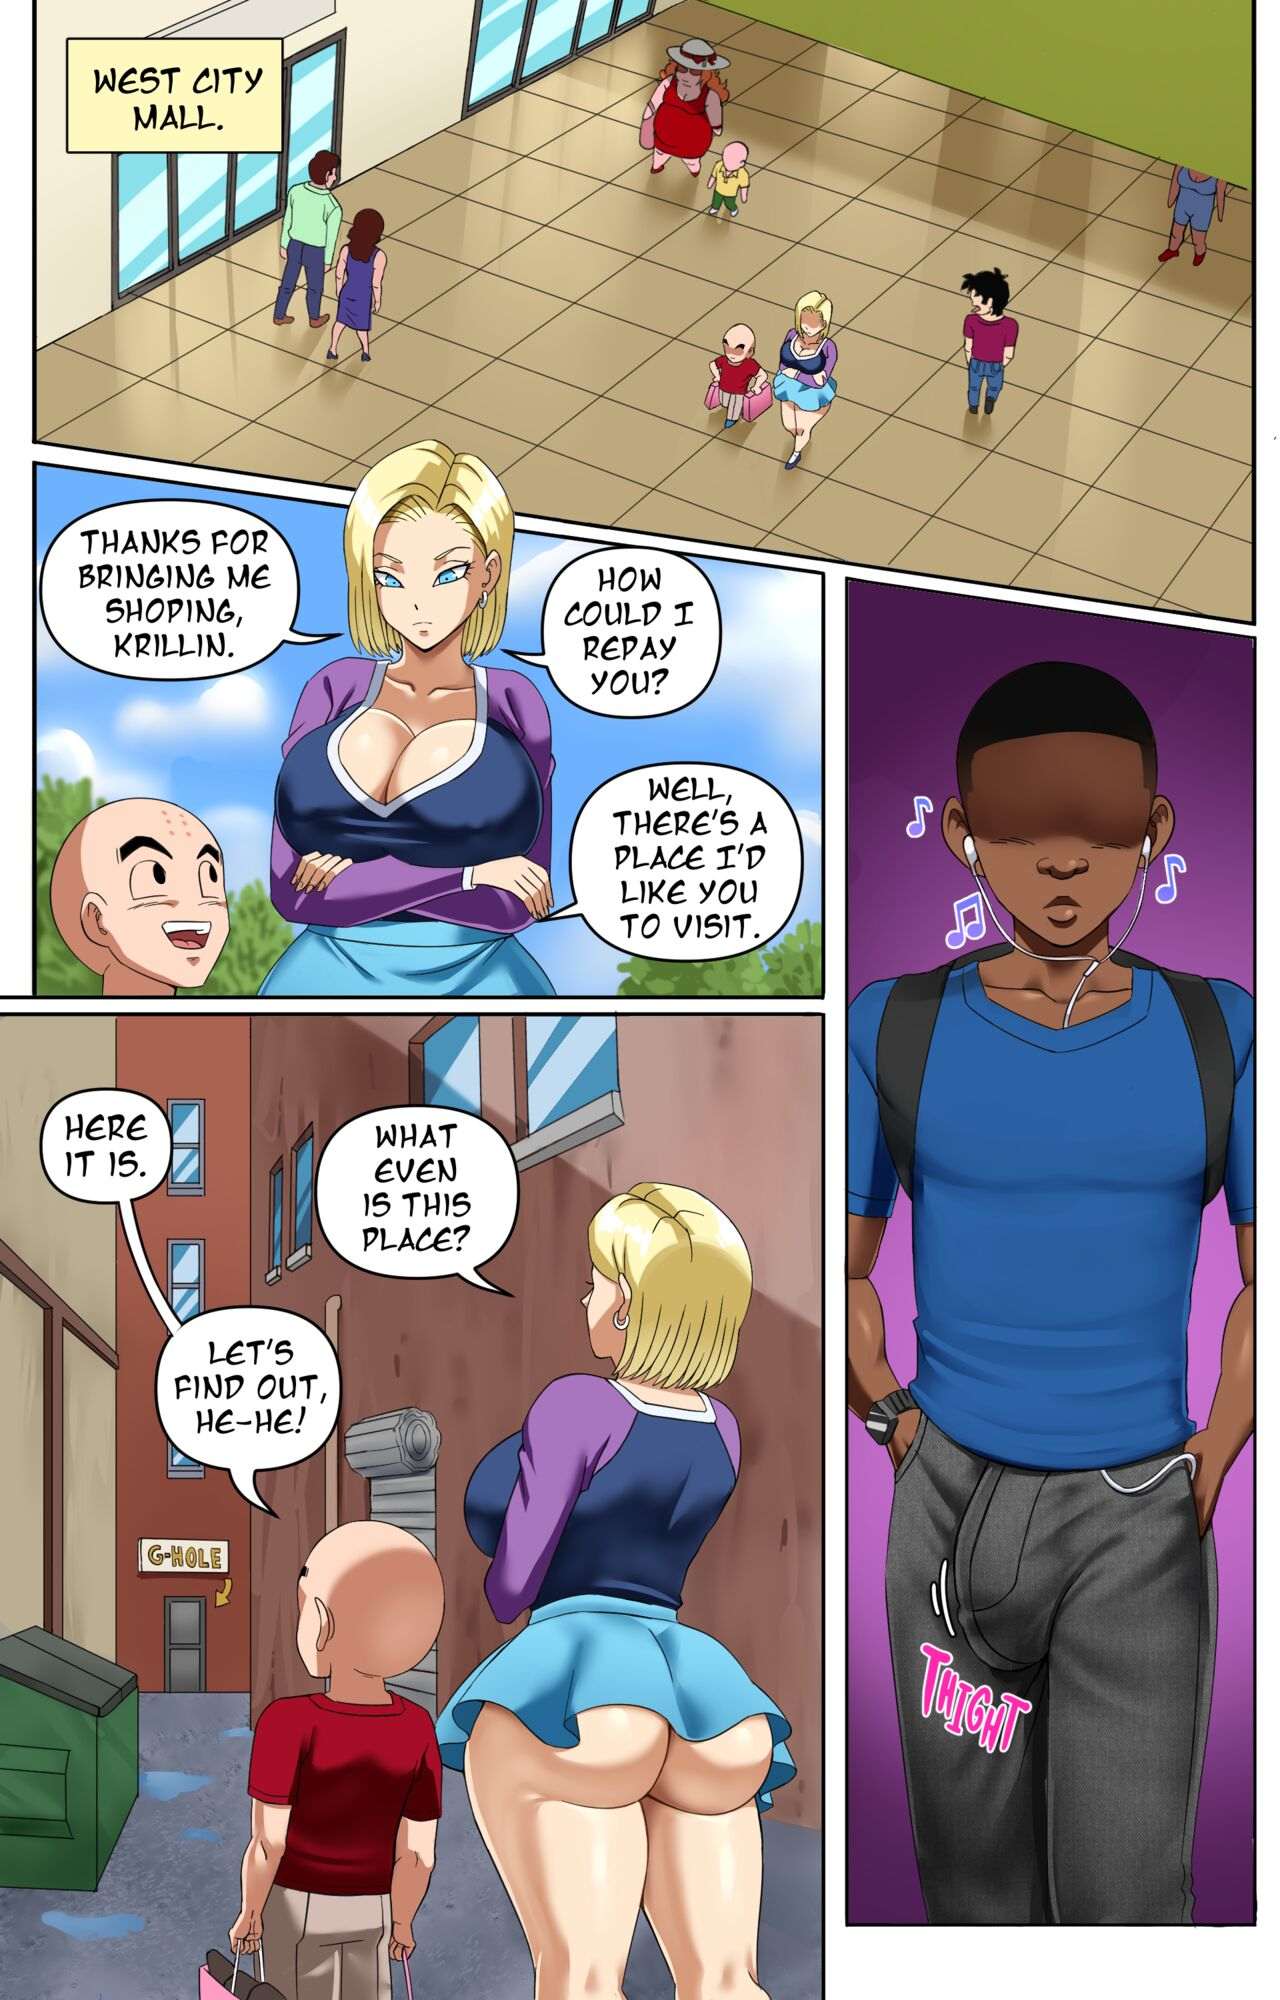 Pink.pawg android 18